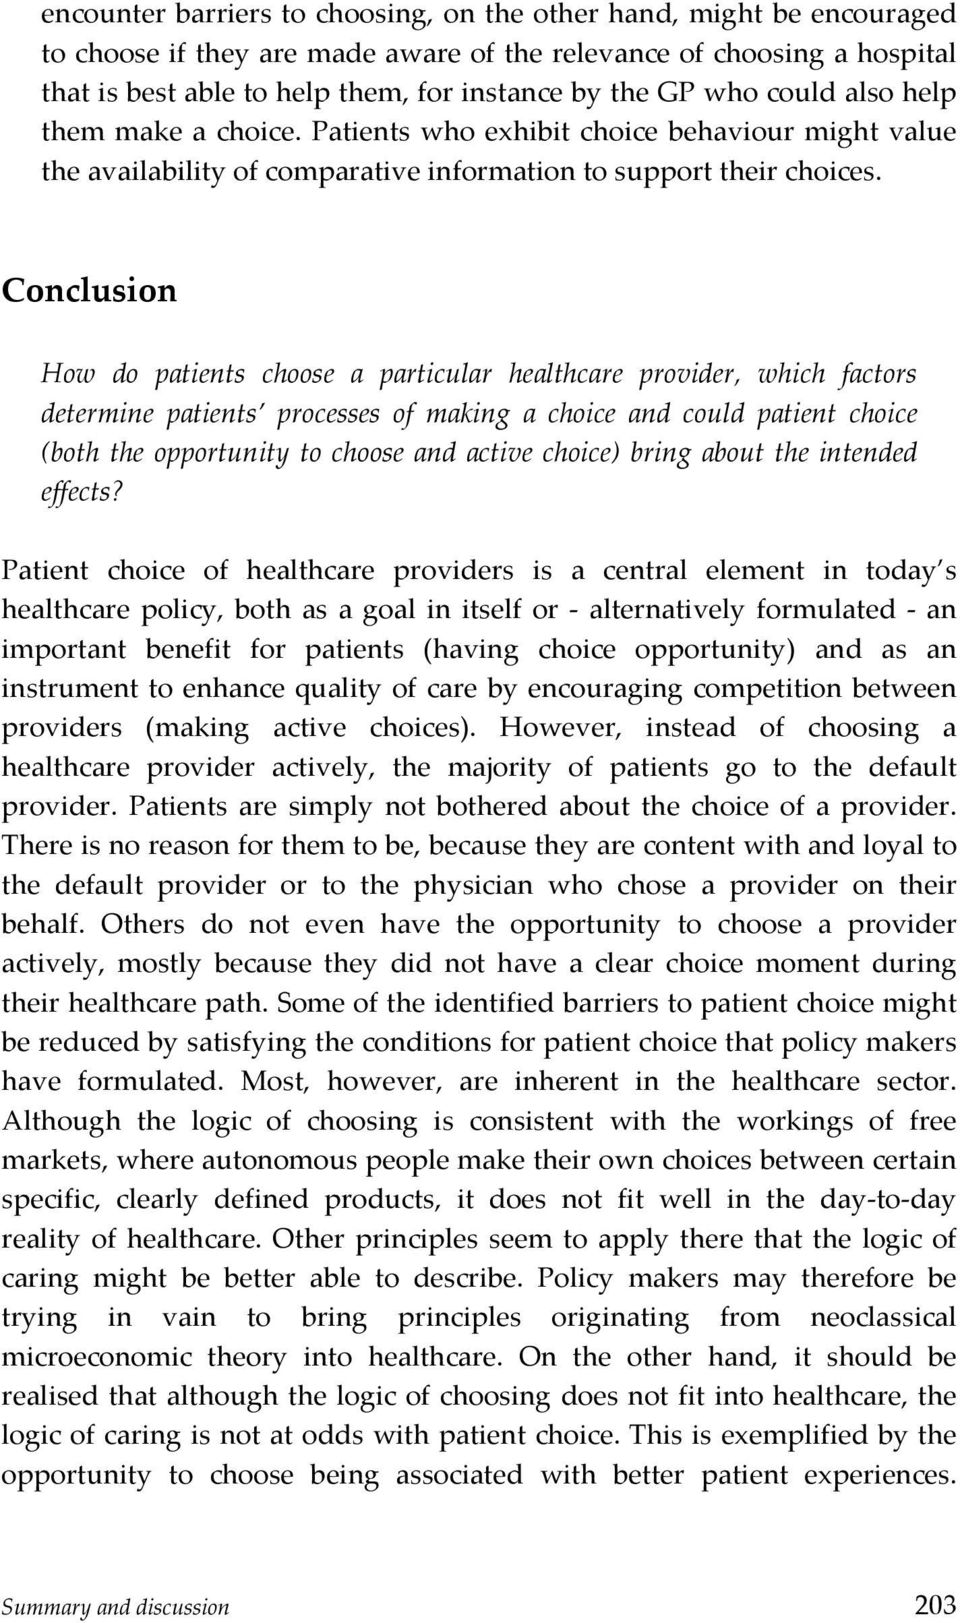 " " Conclusion" " How' do' patients' choose' a' particular' healthcare' provider,' which' factors' determine' patients ' processes' of' making' a' choice' and' could' patient' choice'